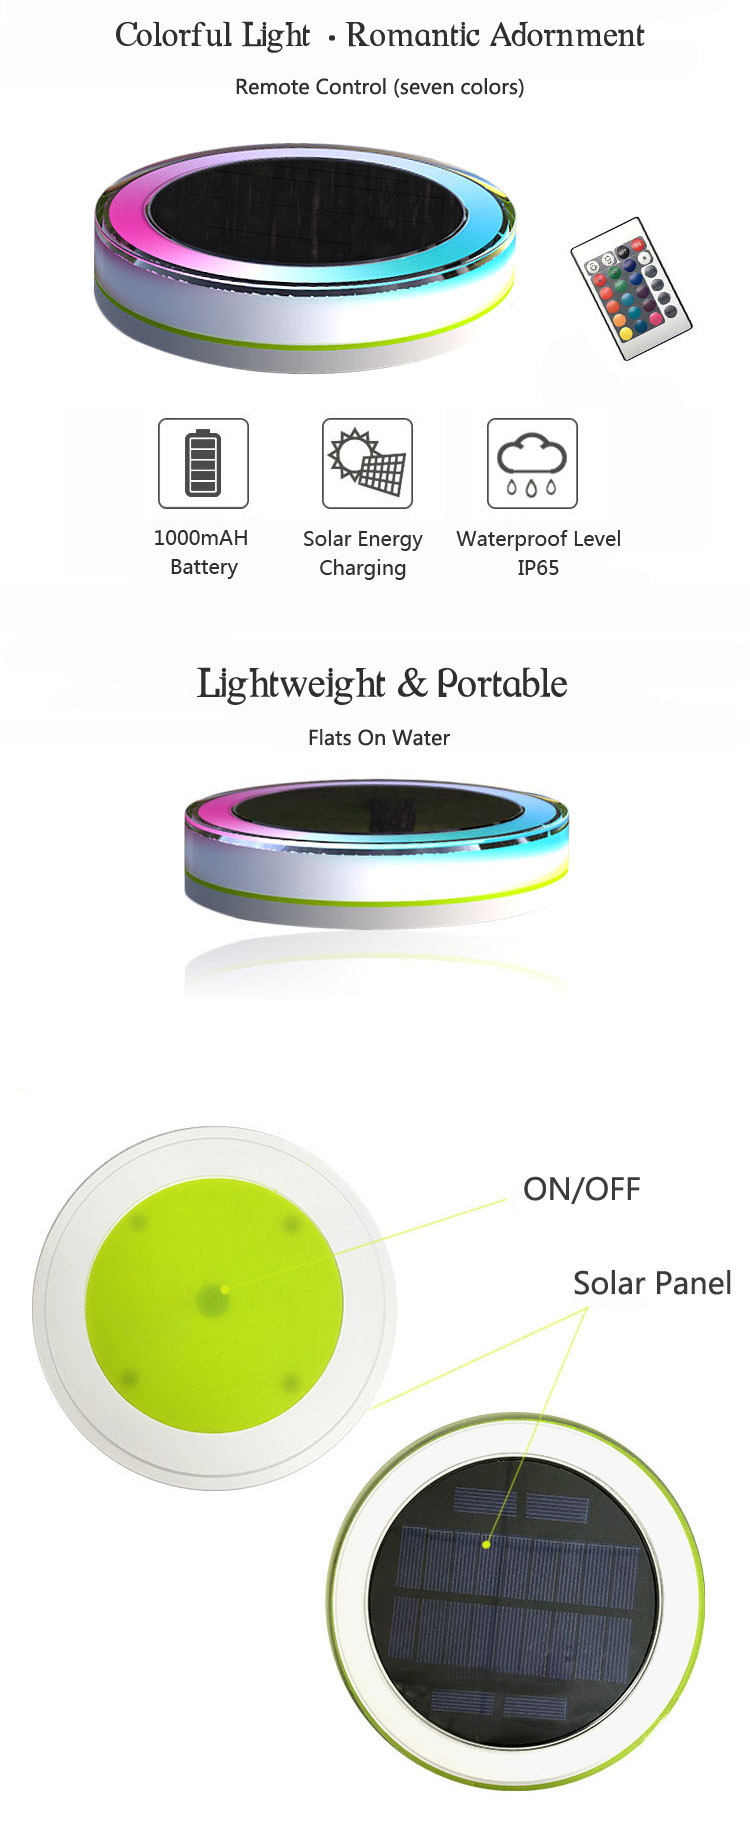 Remote-Control-Solar-Power-LED-Colorful-Swimming-Pool-Light-Garden-Waterproof-Floating-Lamp-1075600-6